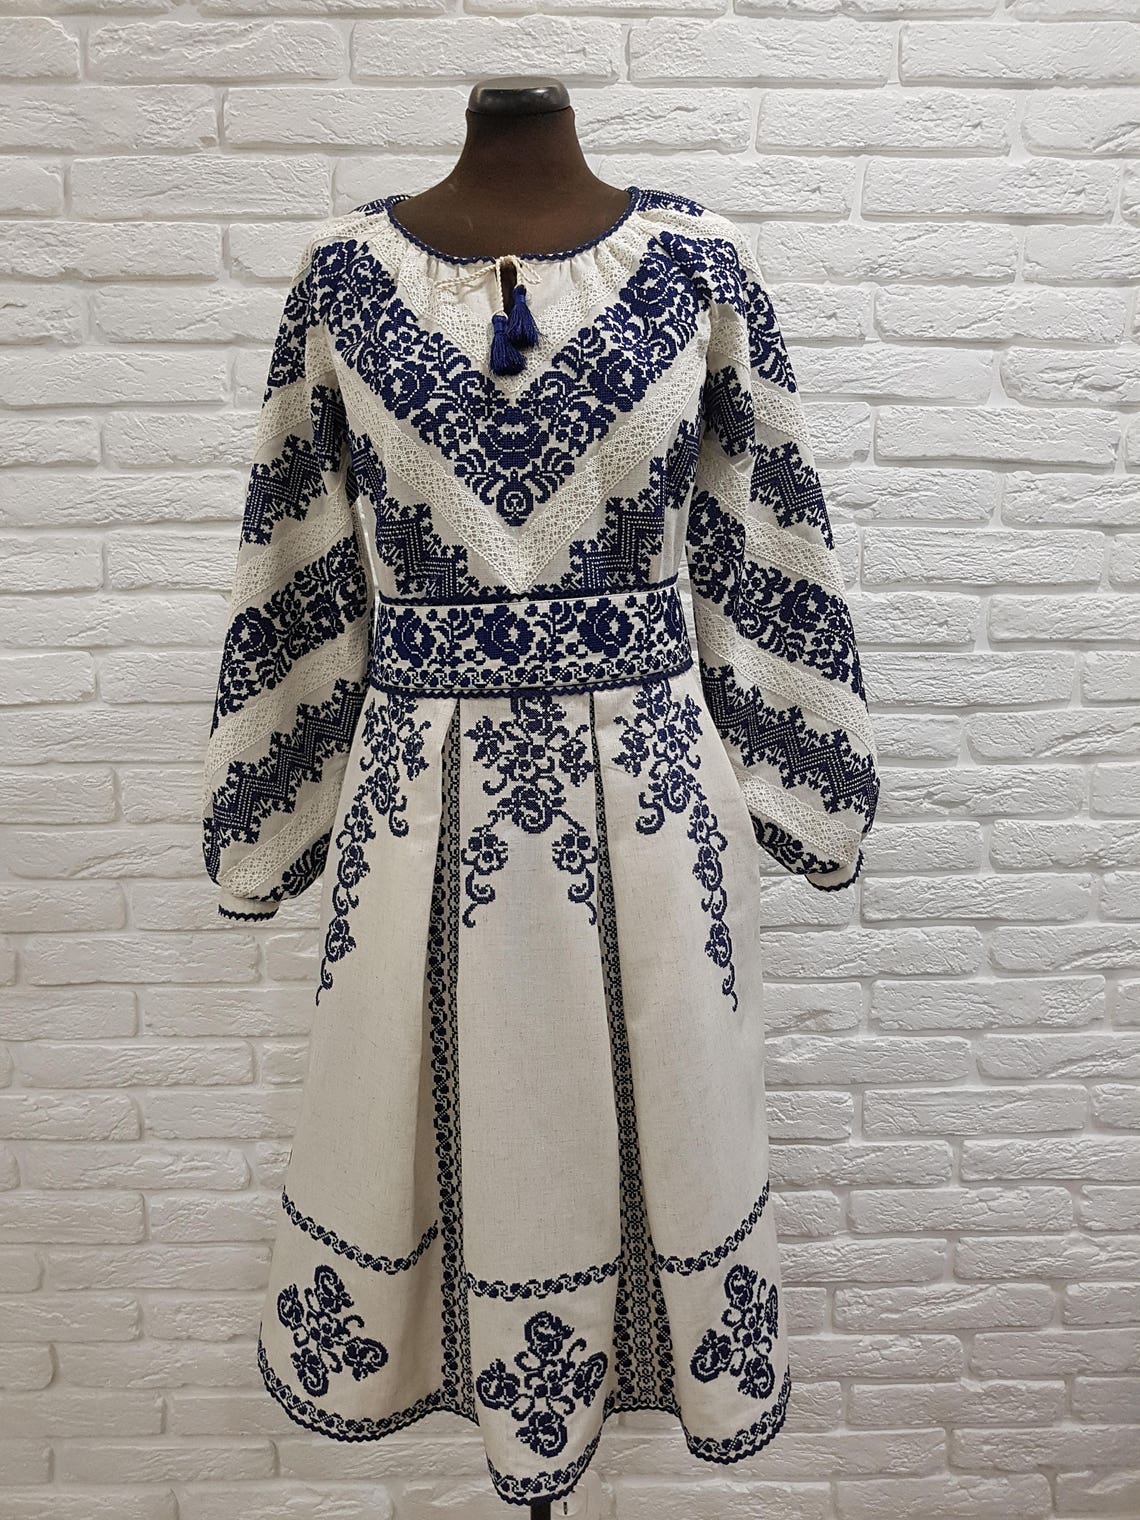 Bohemian Embroidered Dressukrainian Embroidered Dress - Etsy